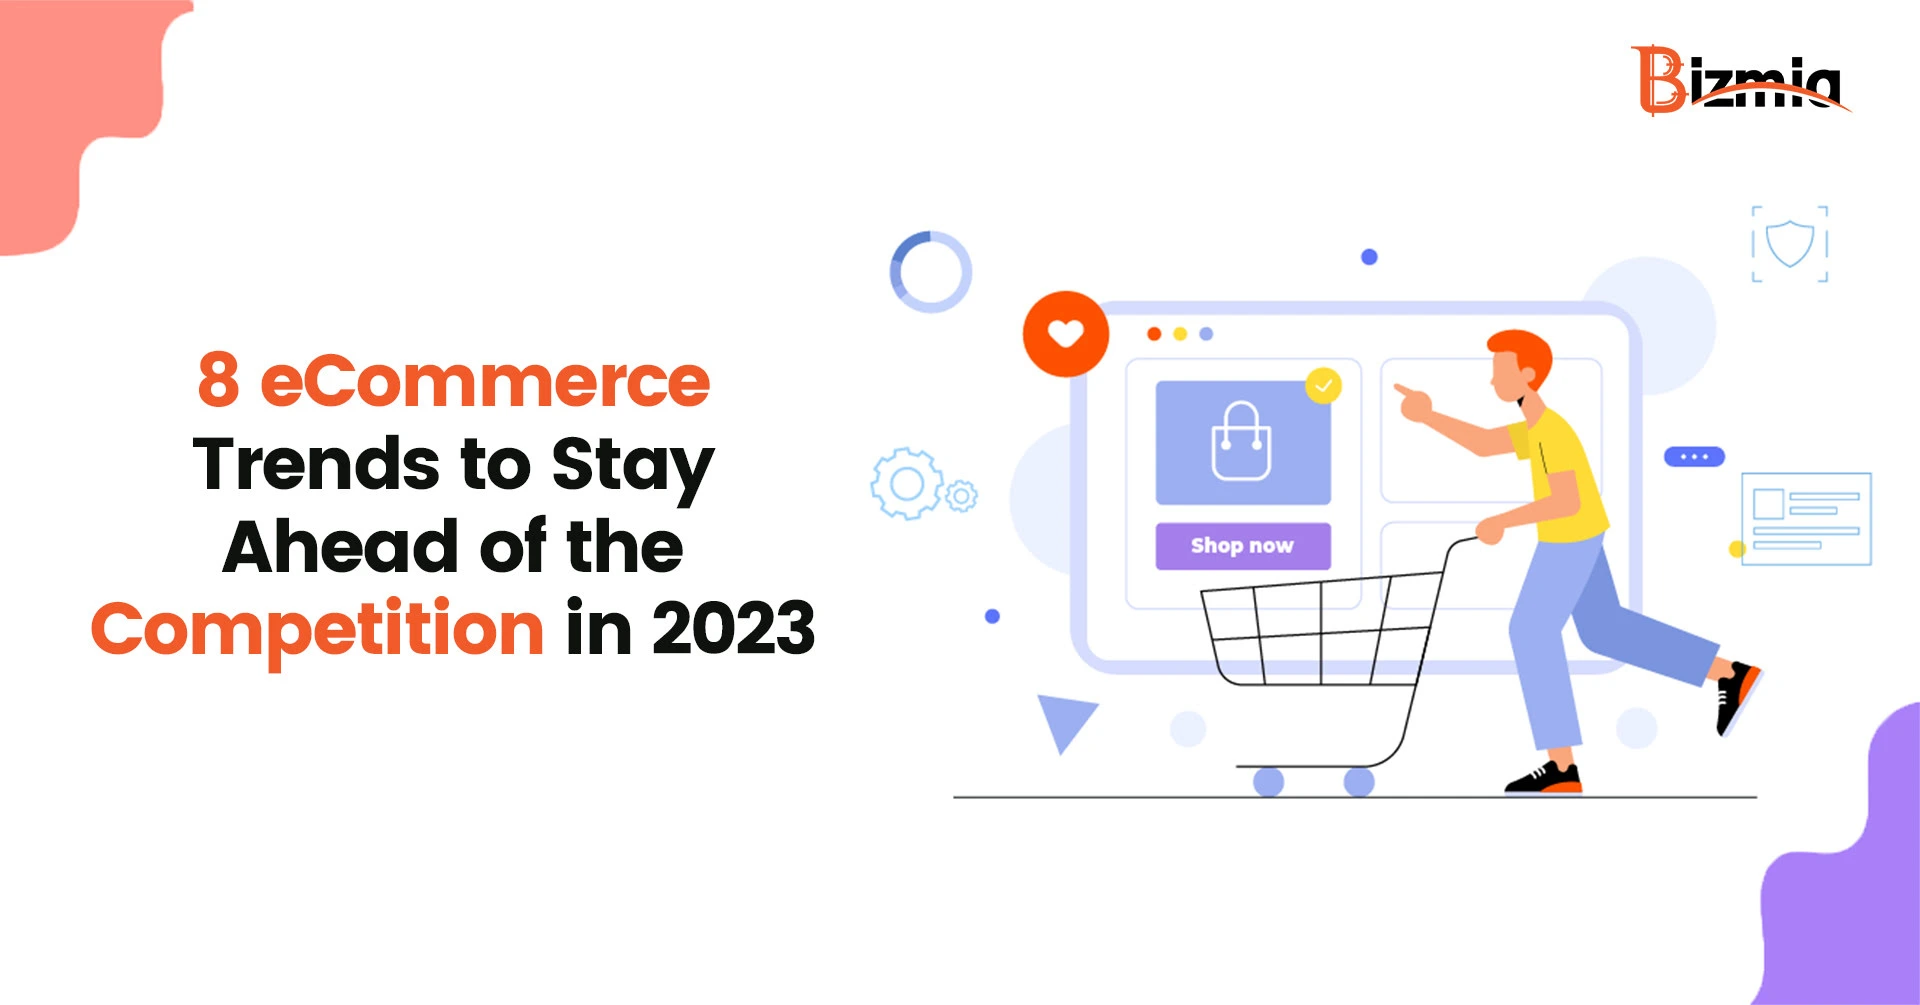 8 eCommerce Trends in 2023